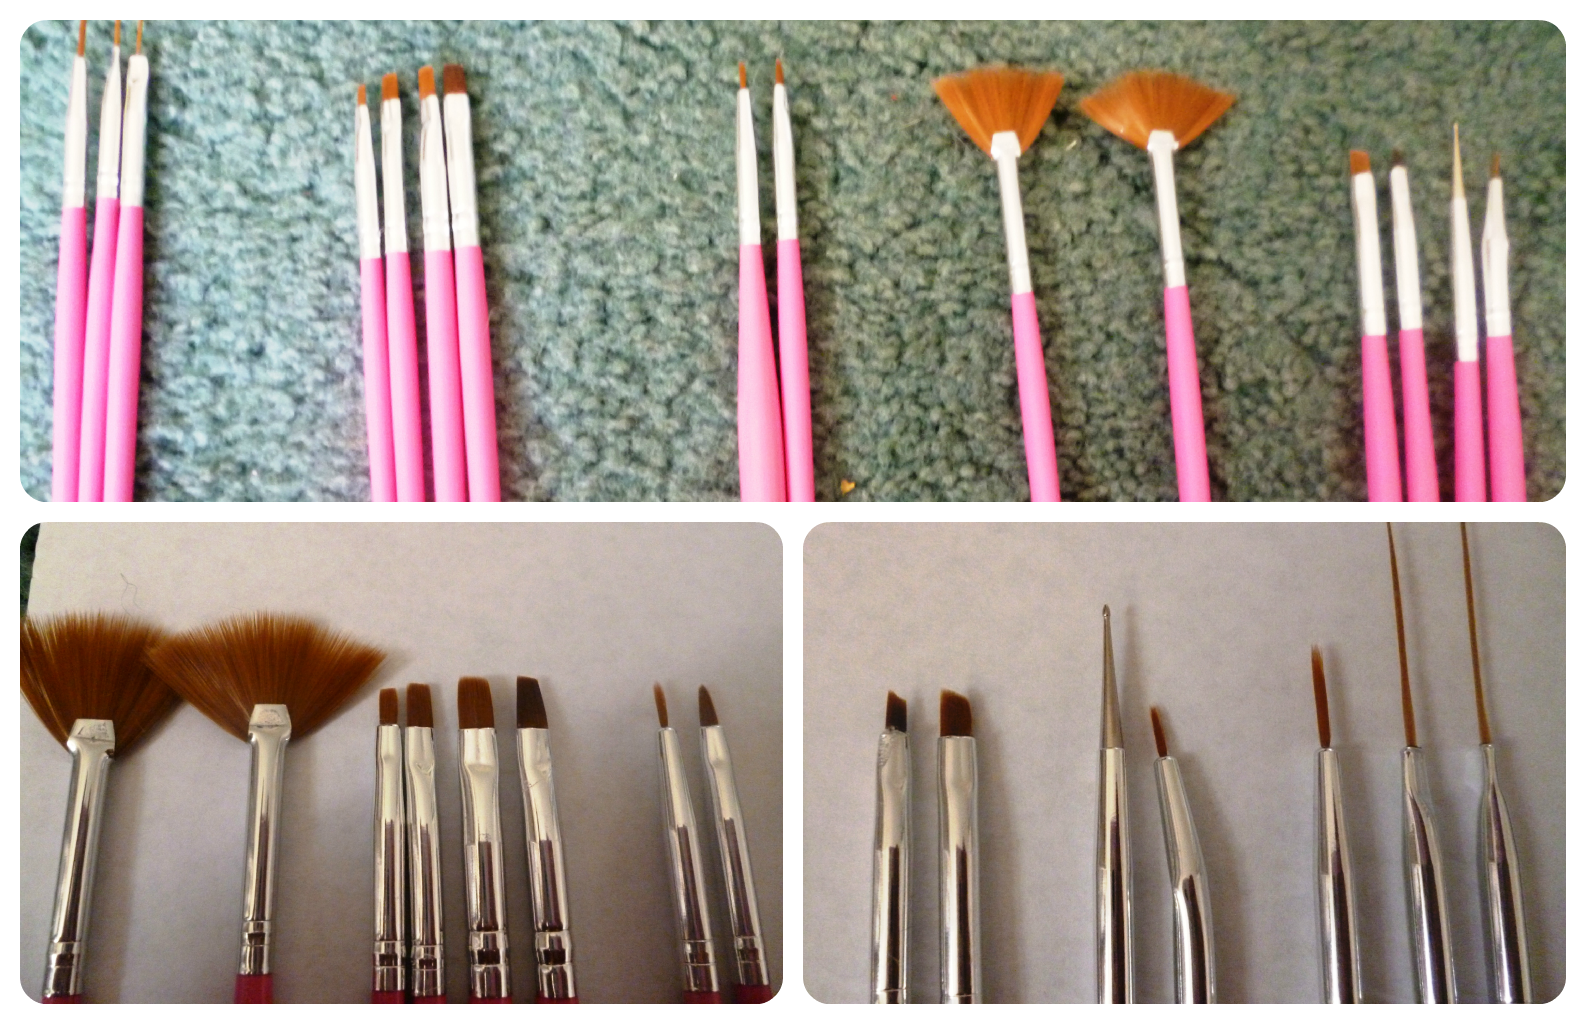 Nail art brushes - wide 4